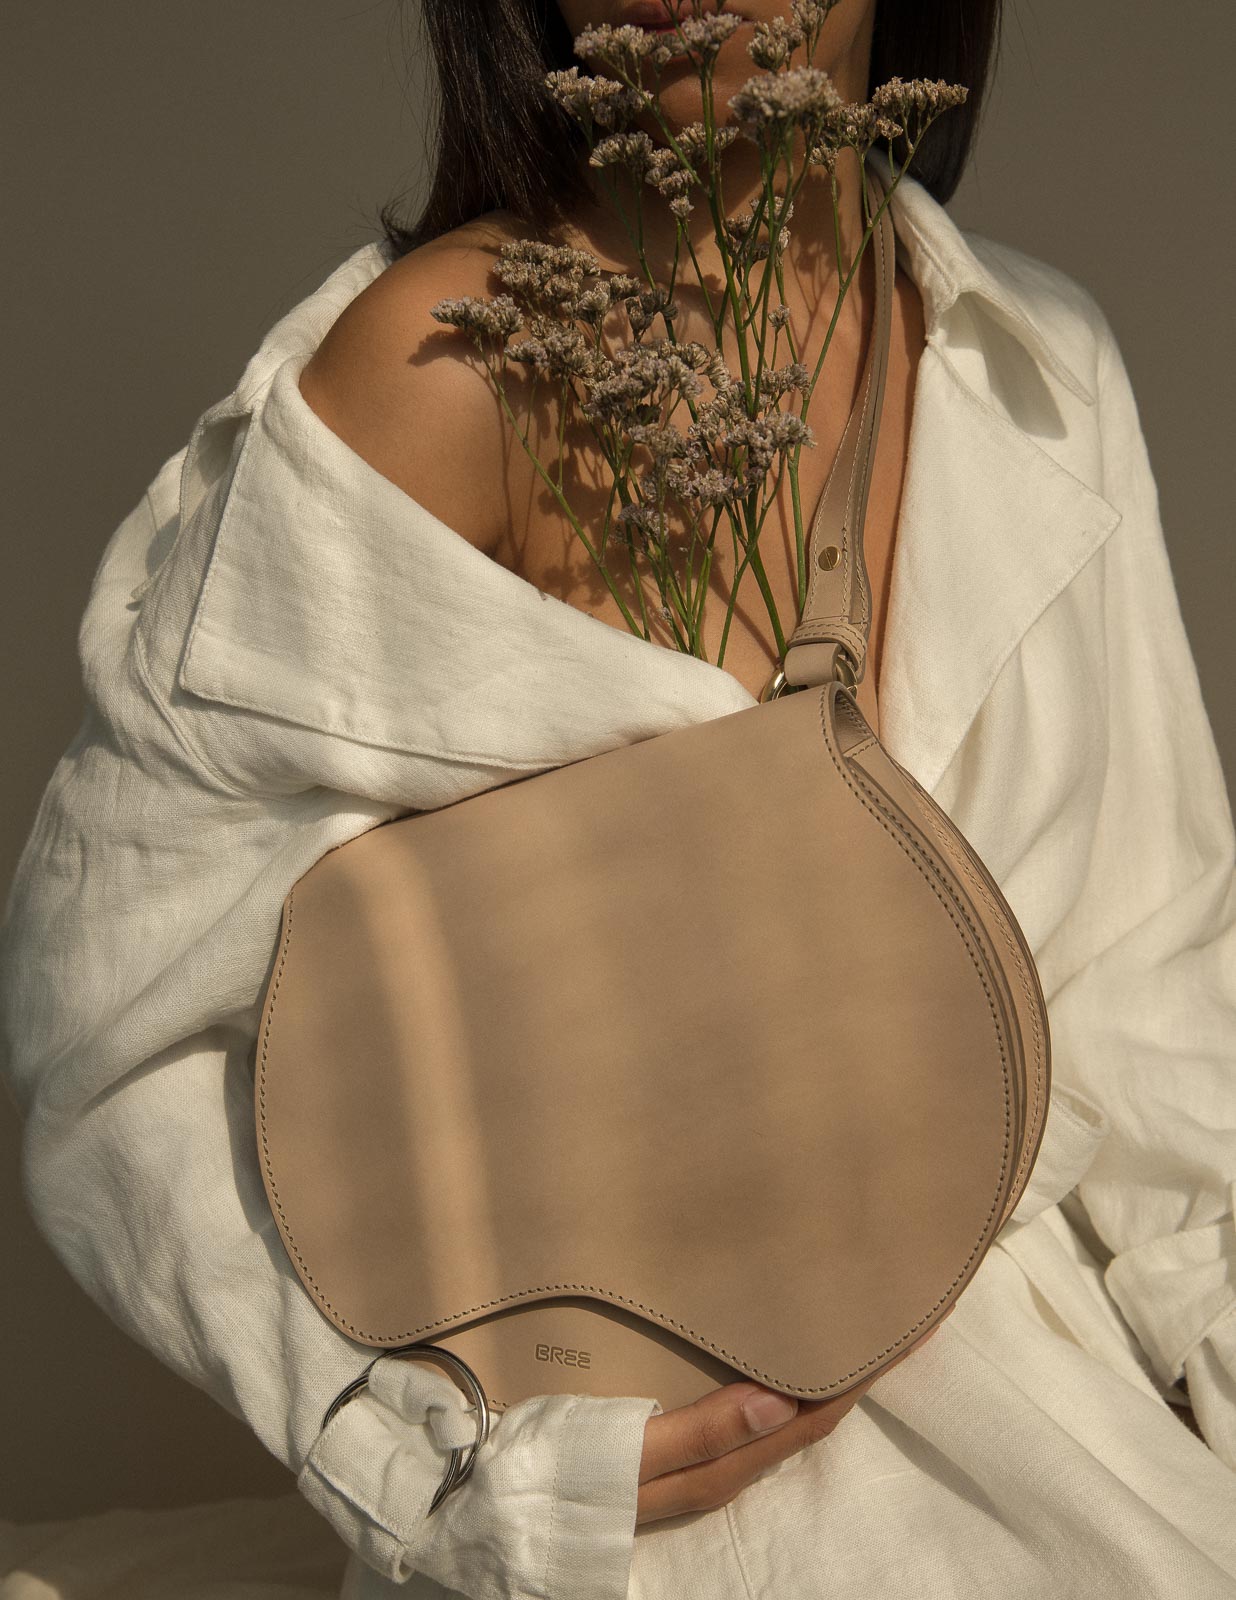 storm wears bree nature bag in the color hummus with a white blanche copenhagen linen coat at Studio230 shot by Marius Knieling